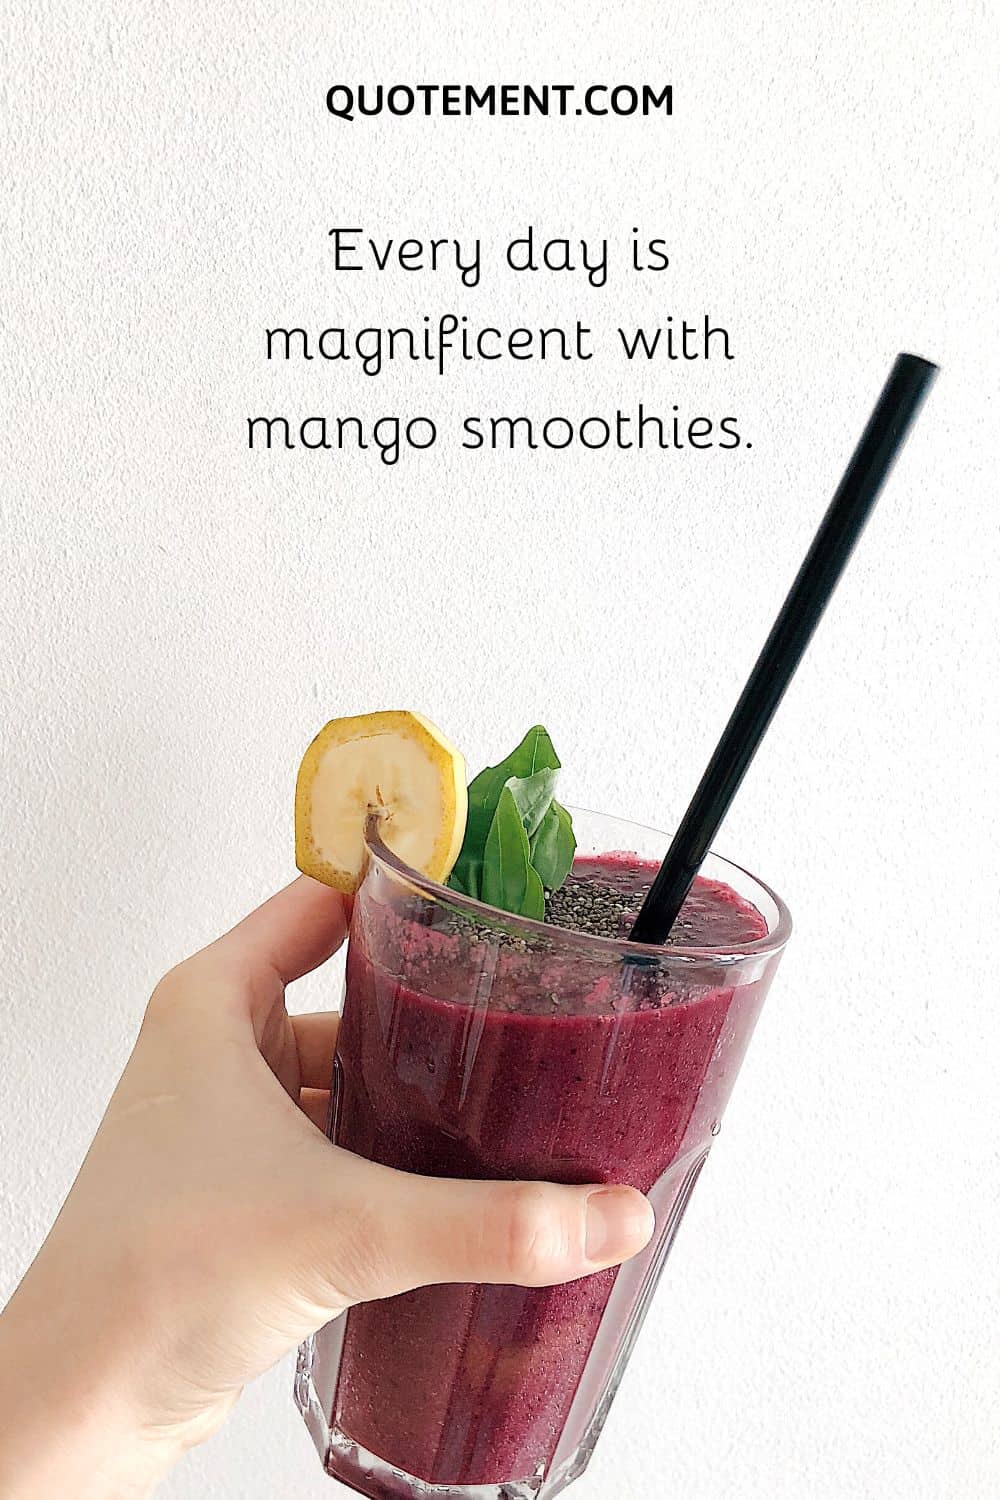 Every day is magnificent with mango smoothies.